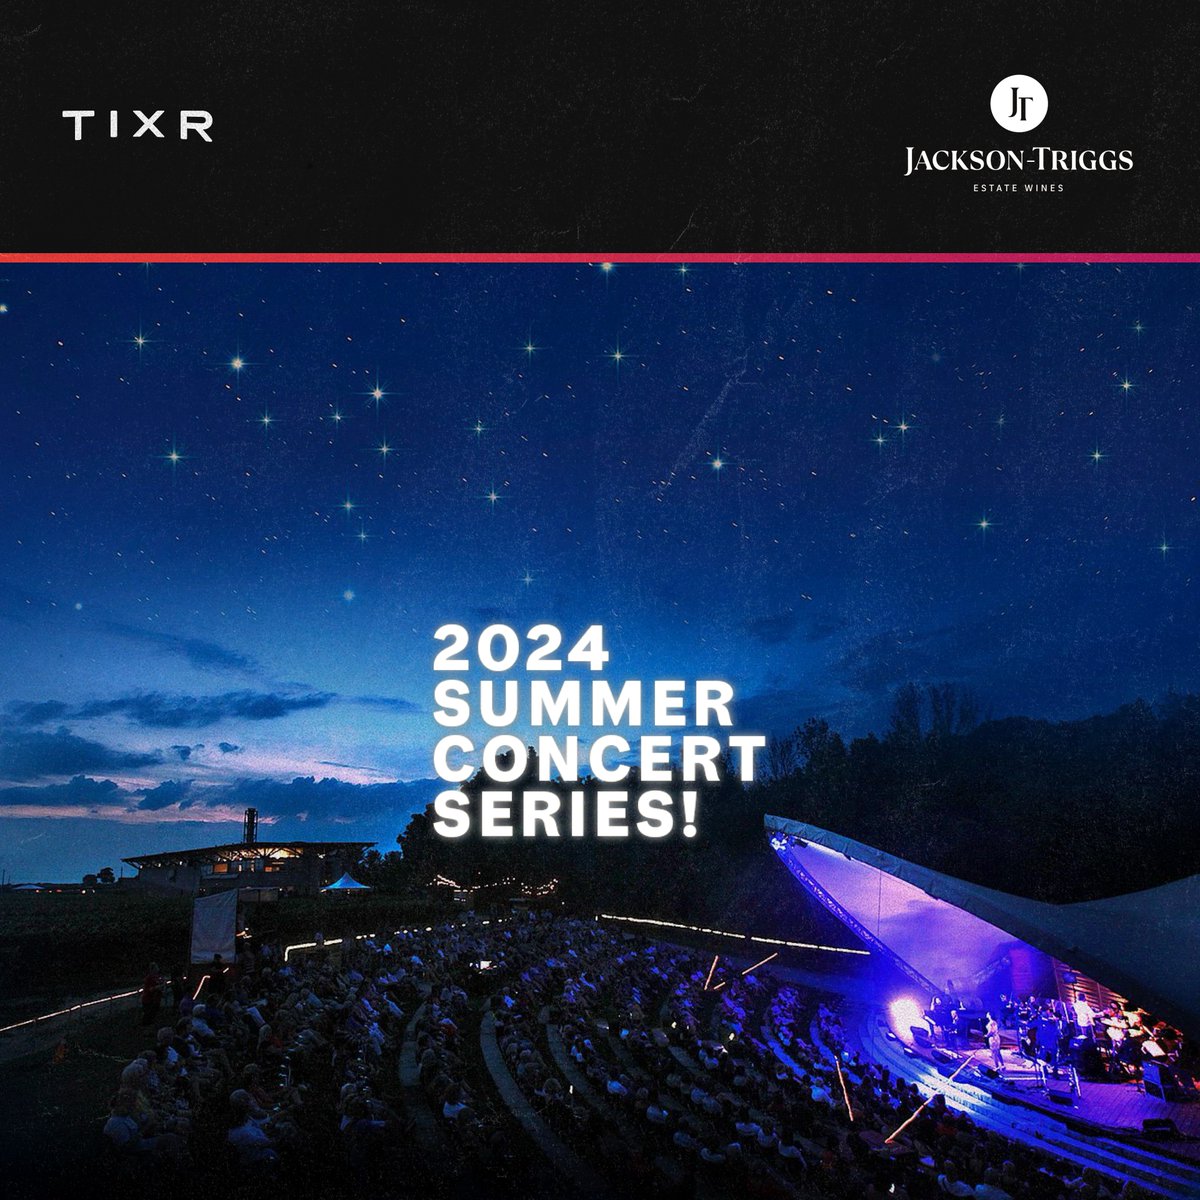 Jackson-Triggs kicks off its 2024 Summer Concert Series at the renowned Jackson-Triggs Estate Winery in Niagara-on-the-Lake. The 500-seat open-air venue plays host to over 150 Canadian artists for a summer under the stars! tixr.com/groups/jackson…